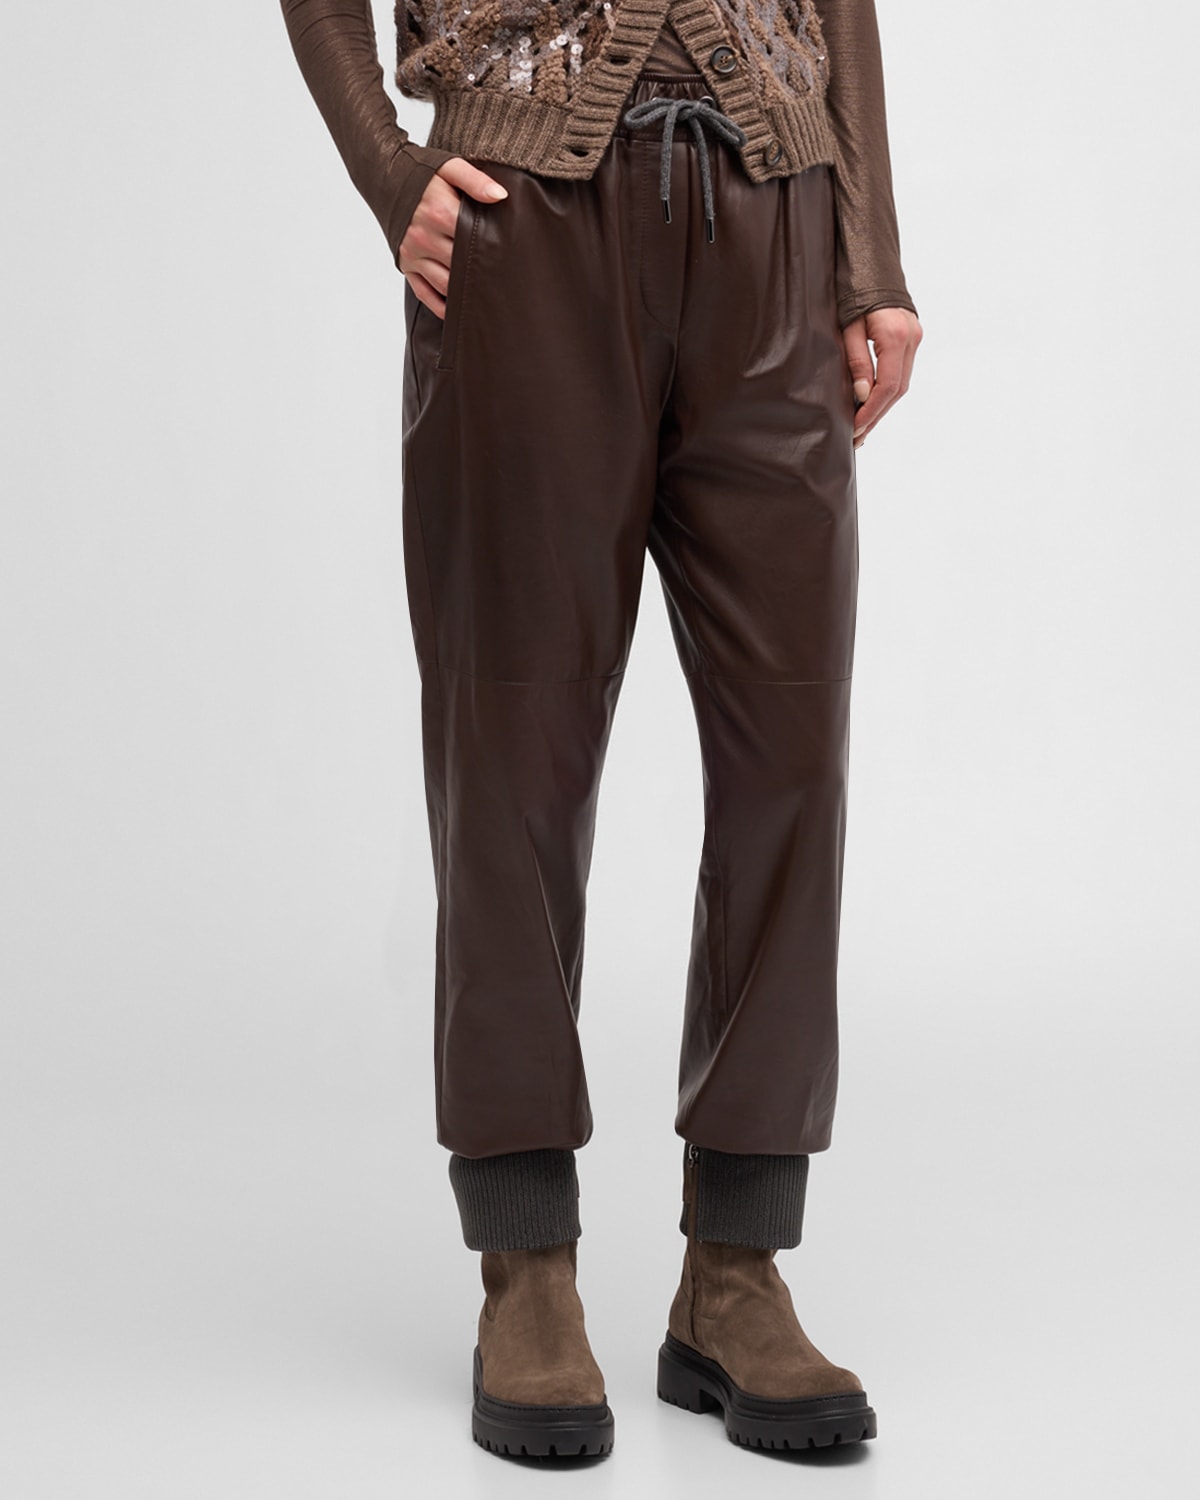 Smooth Glove Leather Track Pants